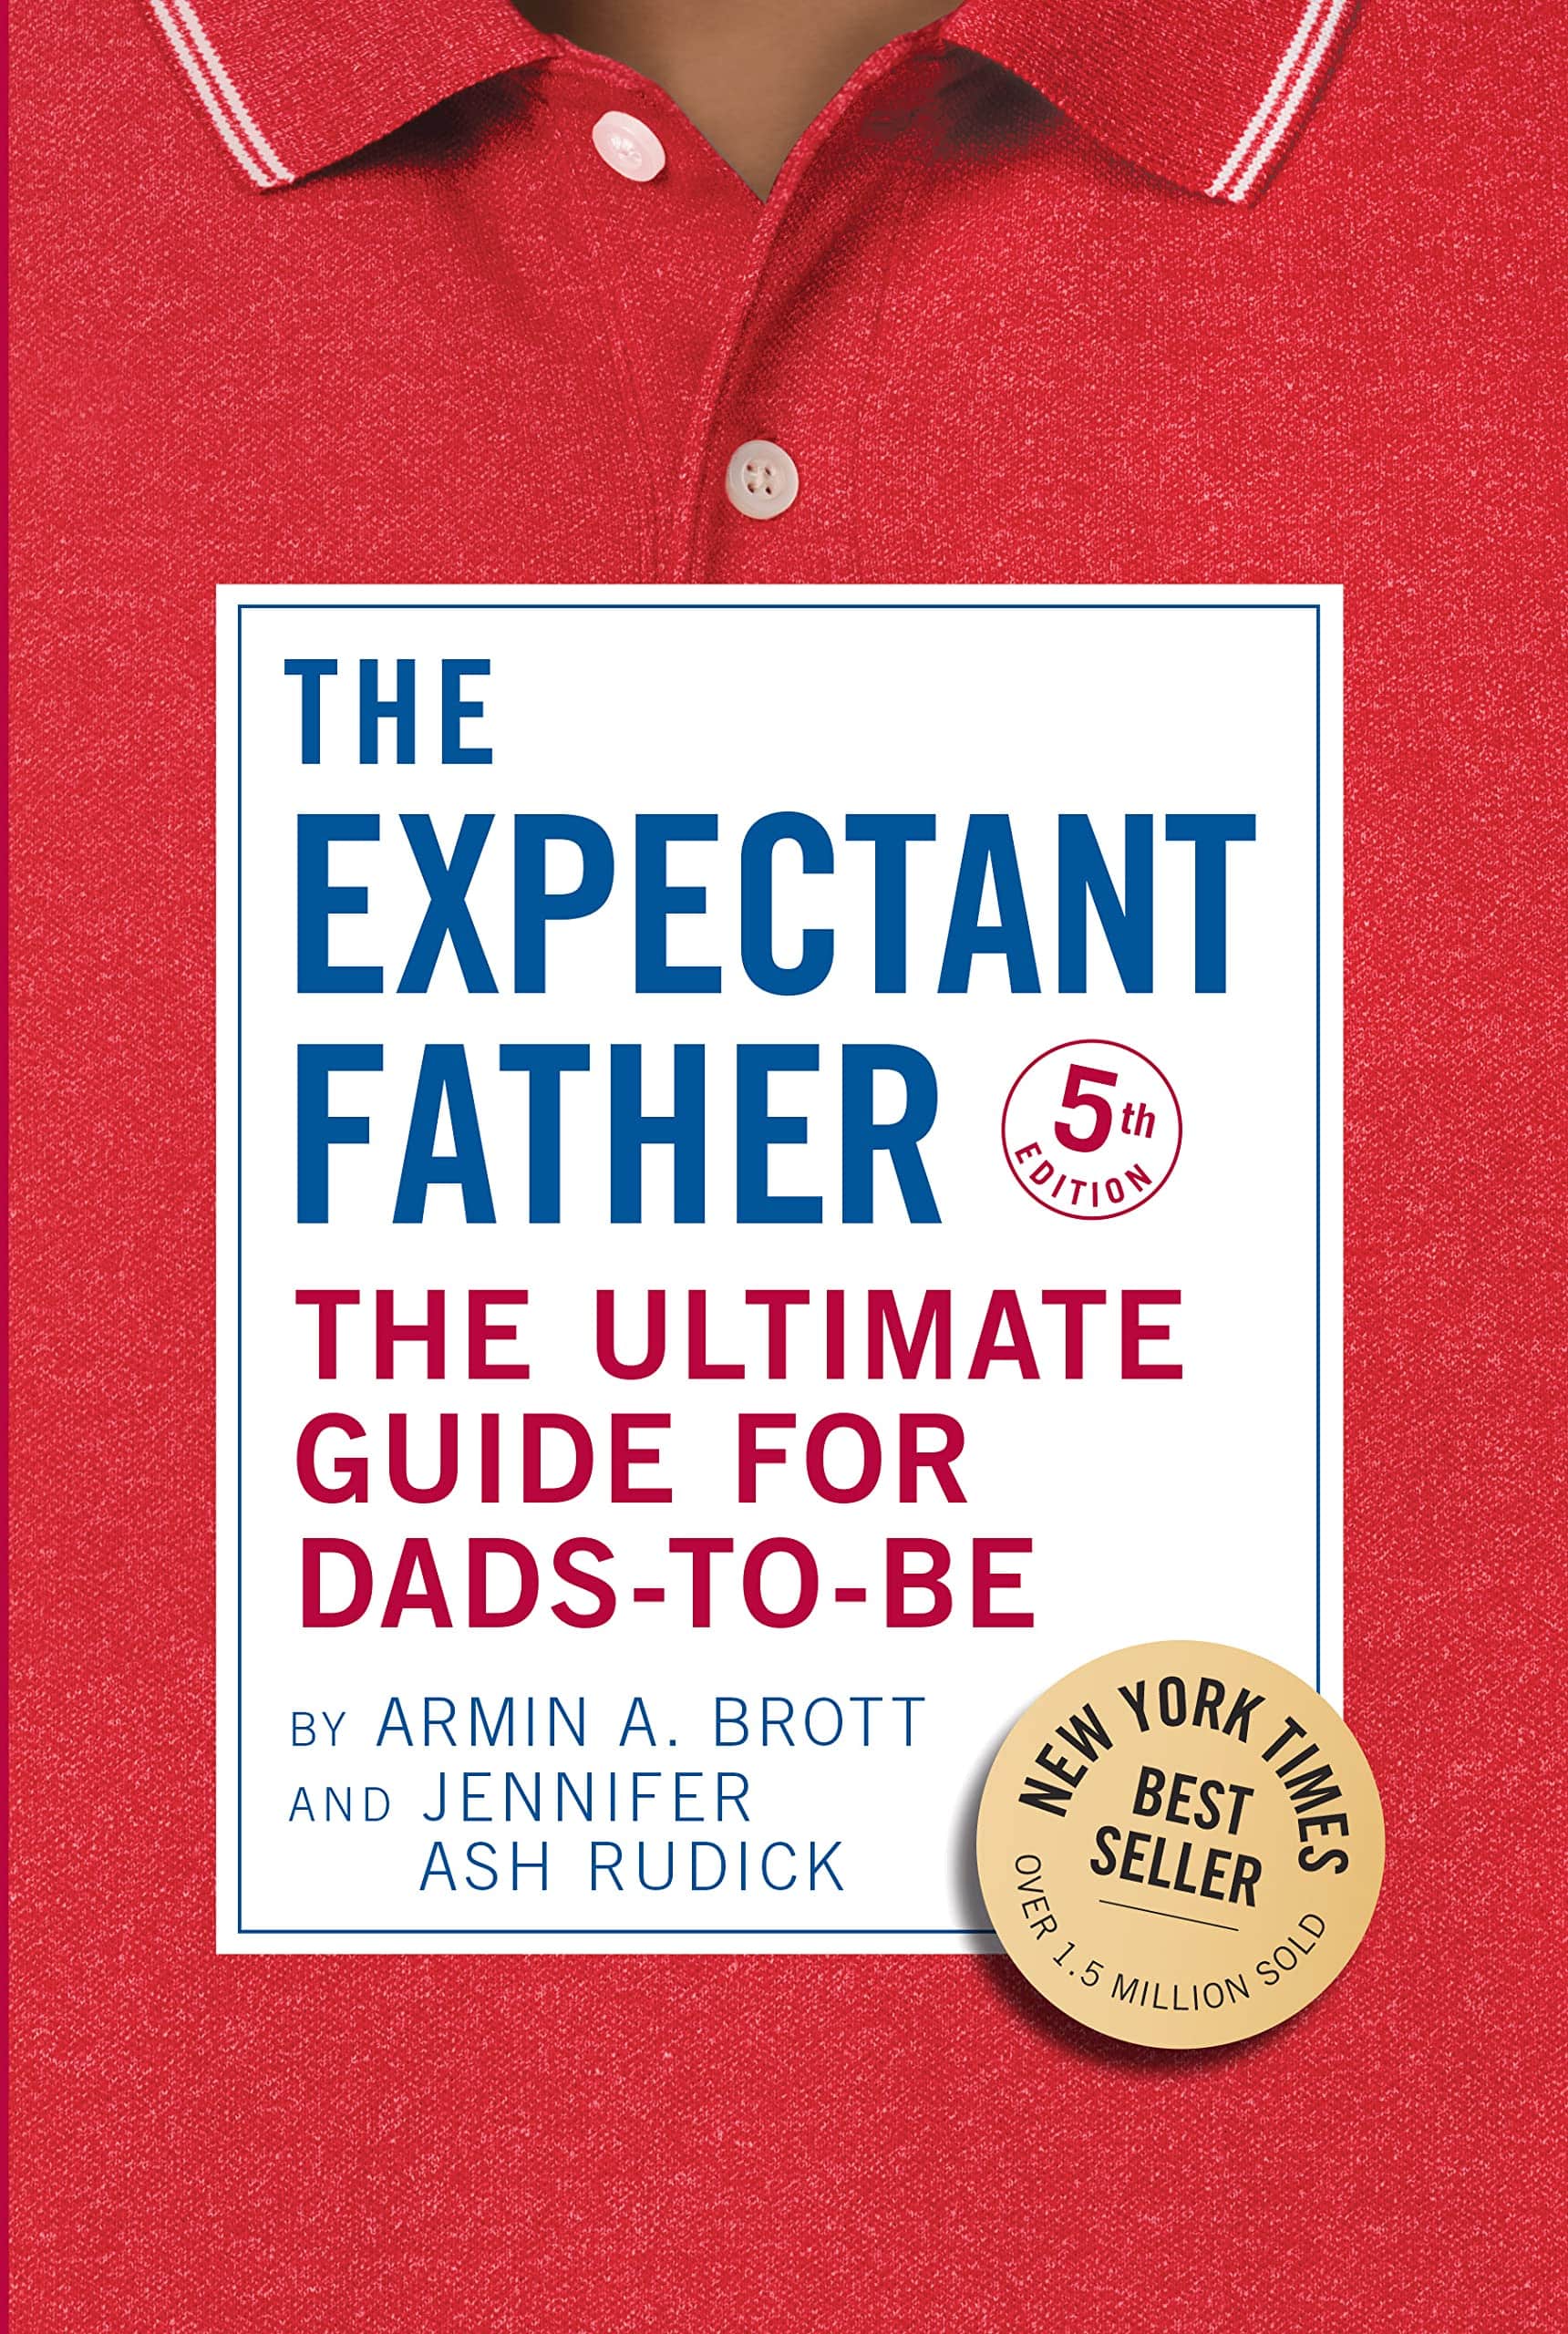 "The Expectant Father" by Armin A. Brott and Jennifer Ash Rudick